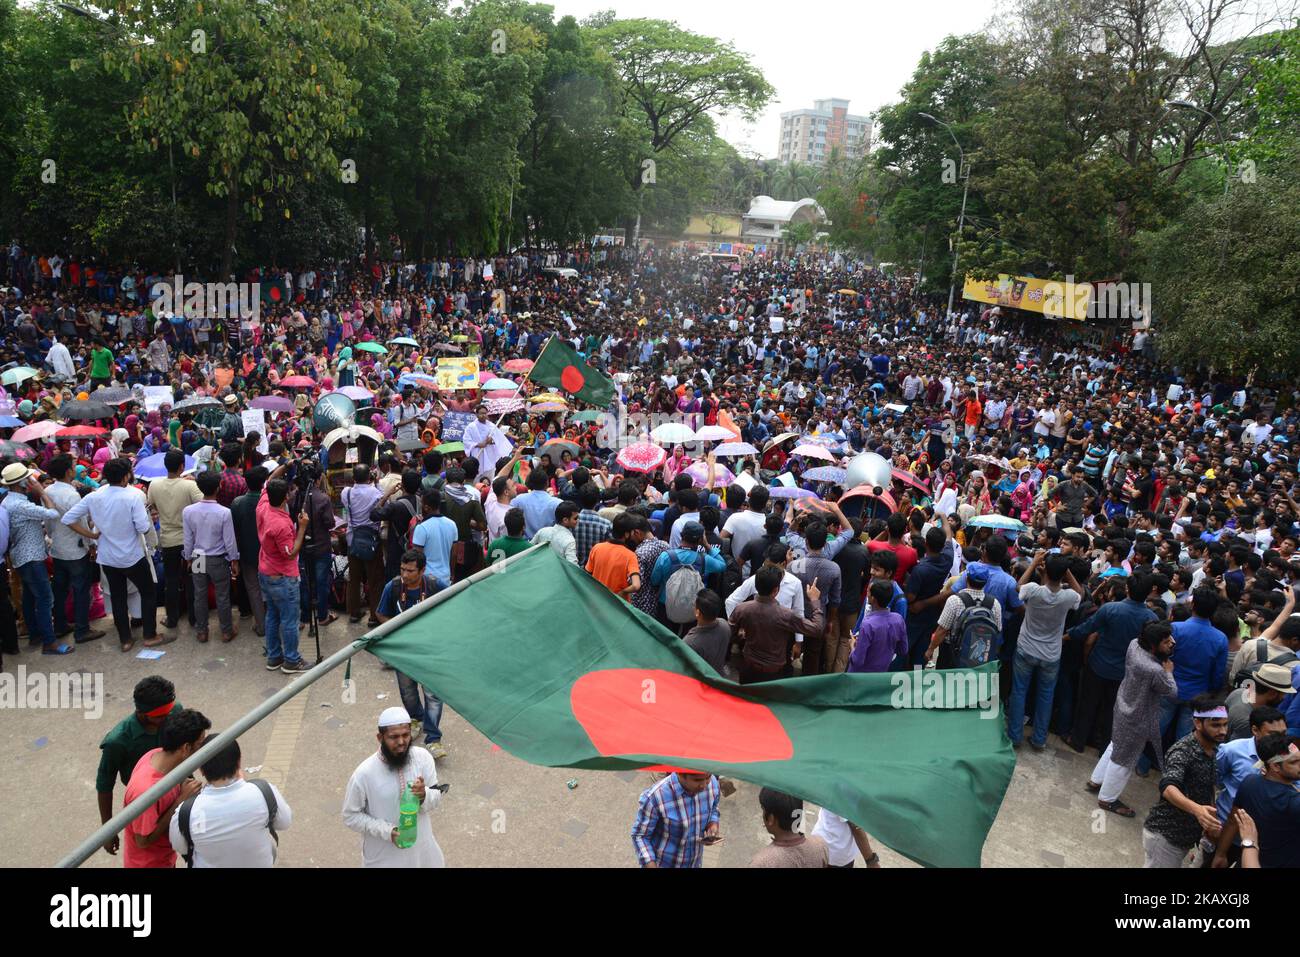 Bangladeshi University students demonstration to protest against quotas for certain groups of people in government jobs in Dhaka, Bangladesh, on April 11, 2018.More than tens of thousands of university students marched in cities across Bangladesh on April 11 in one of the biggest protests faced by Prime Minister Sheikh Hasina in her decade in power. Students fighting against a controversial policy that sets aside government jobs for special groups have united in mass protests rarely seen on such a scale in Bangladesh. (Photo by Mamunur Rashid/NurPhoto) Stock Photo